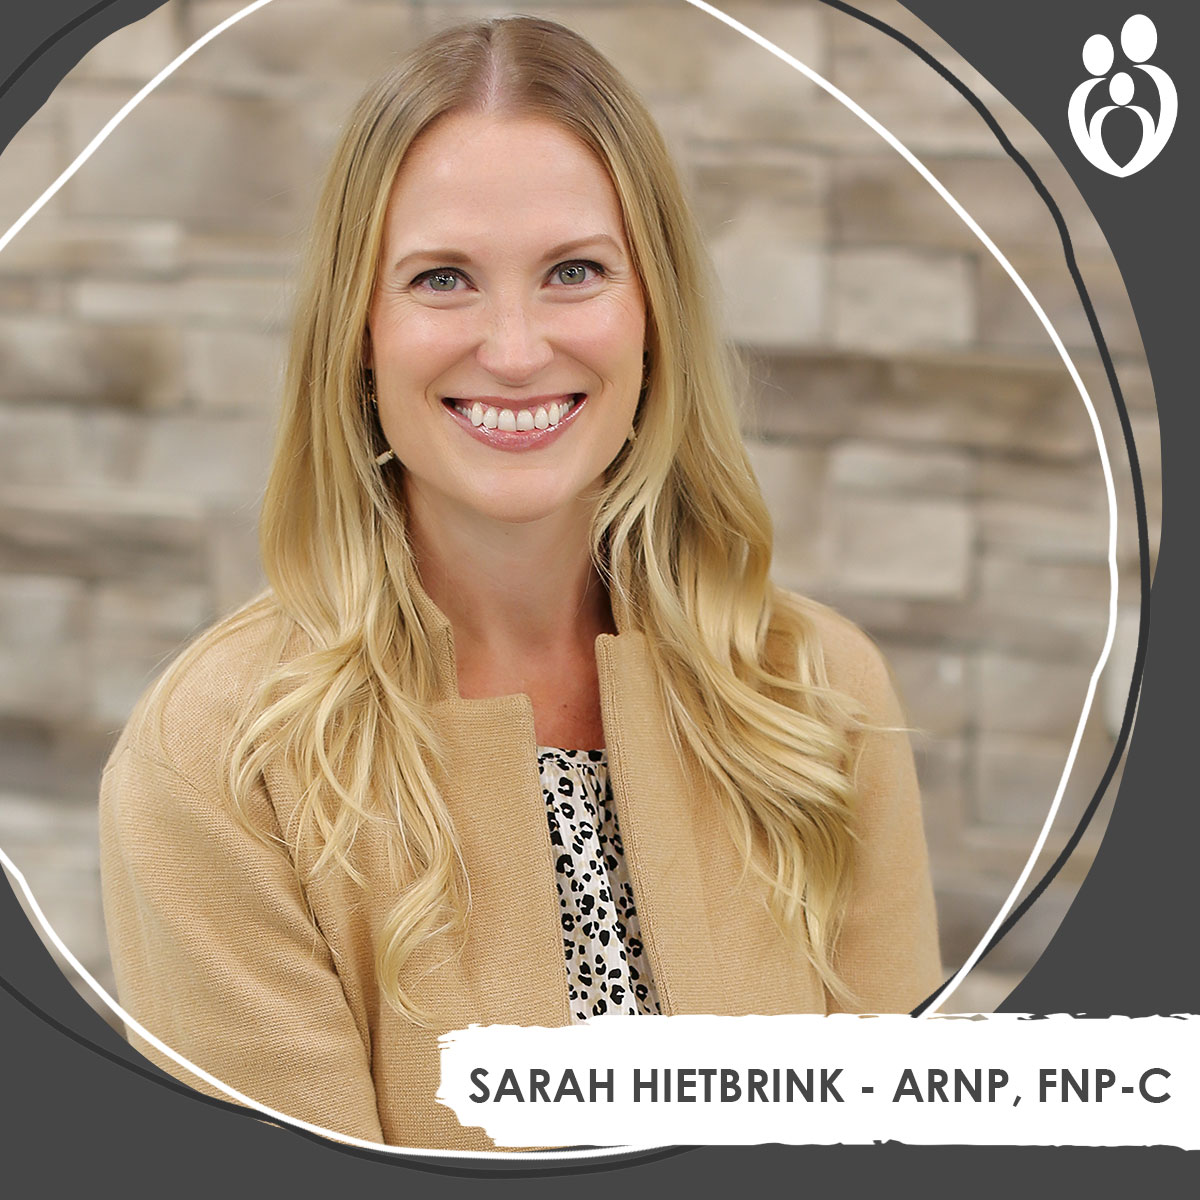 Sarah Hietbrink, NP | Promise Community Health Center in Sioux Center, Iowa | Promise offers medical care, prenatal care, behavioral healthcare, population health care as well as dental and vision care,  nurse health coaching, clinical pharmacy and affordable medications, lab services and immunizations, interpretation and translation, and various other services.